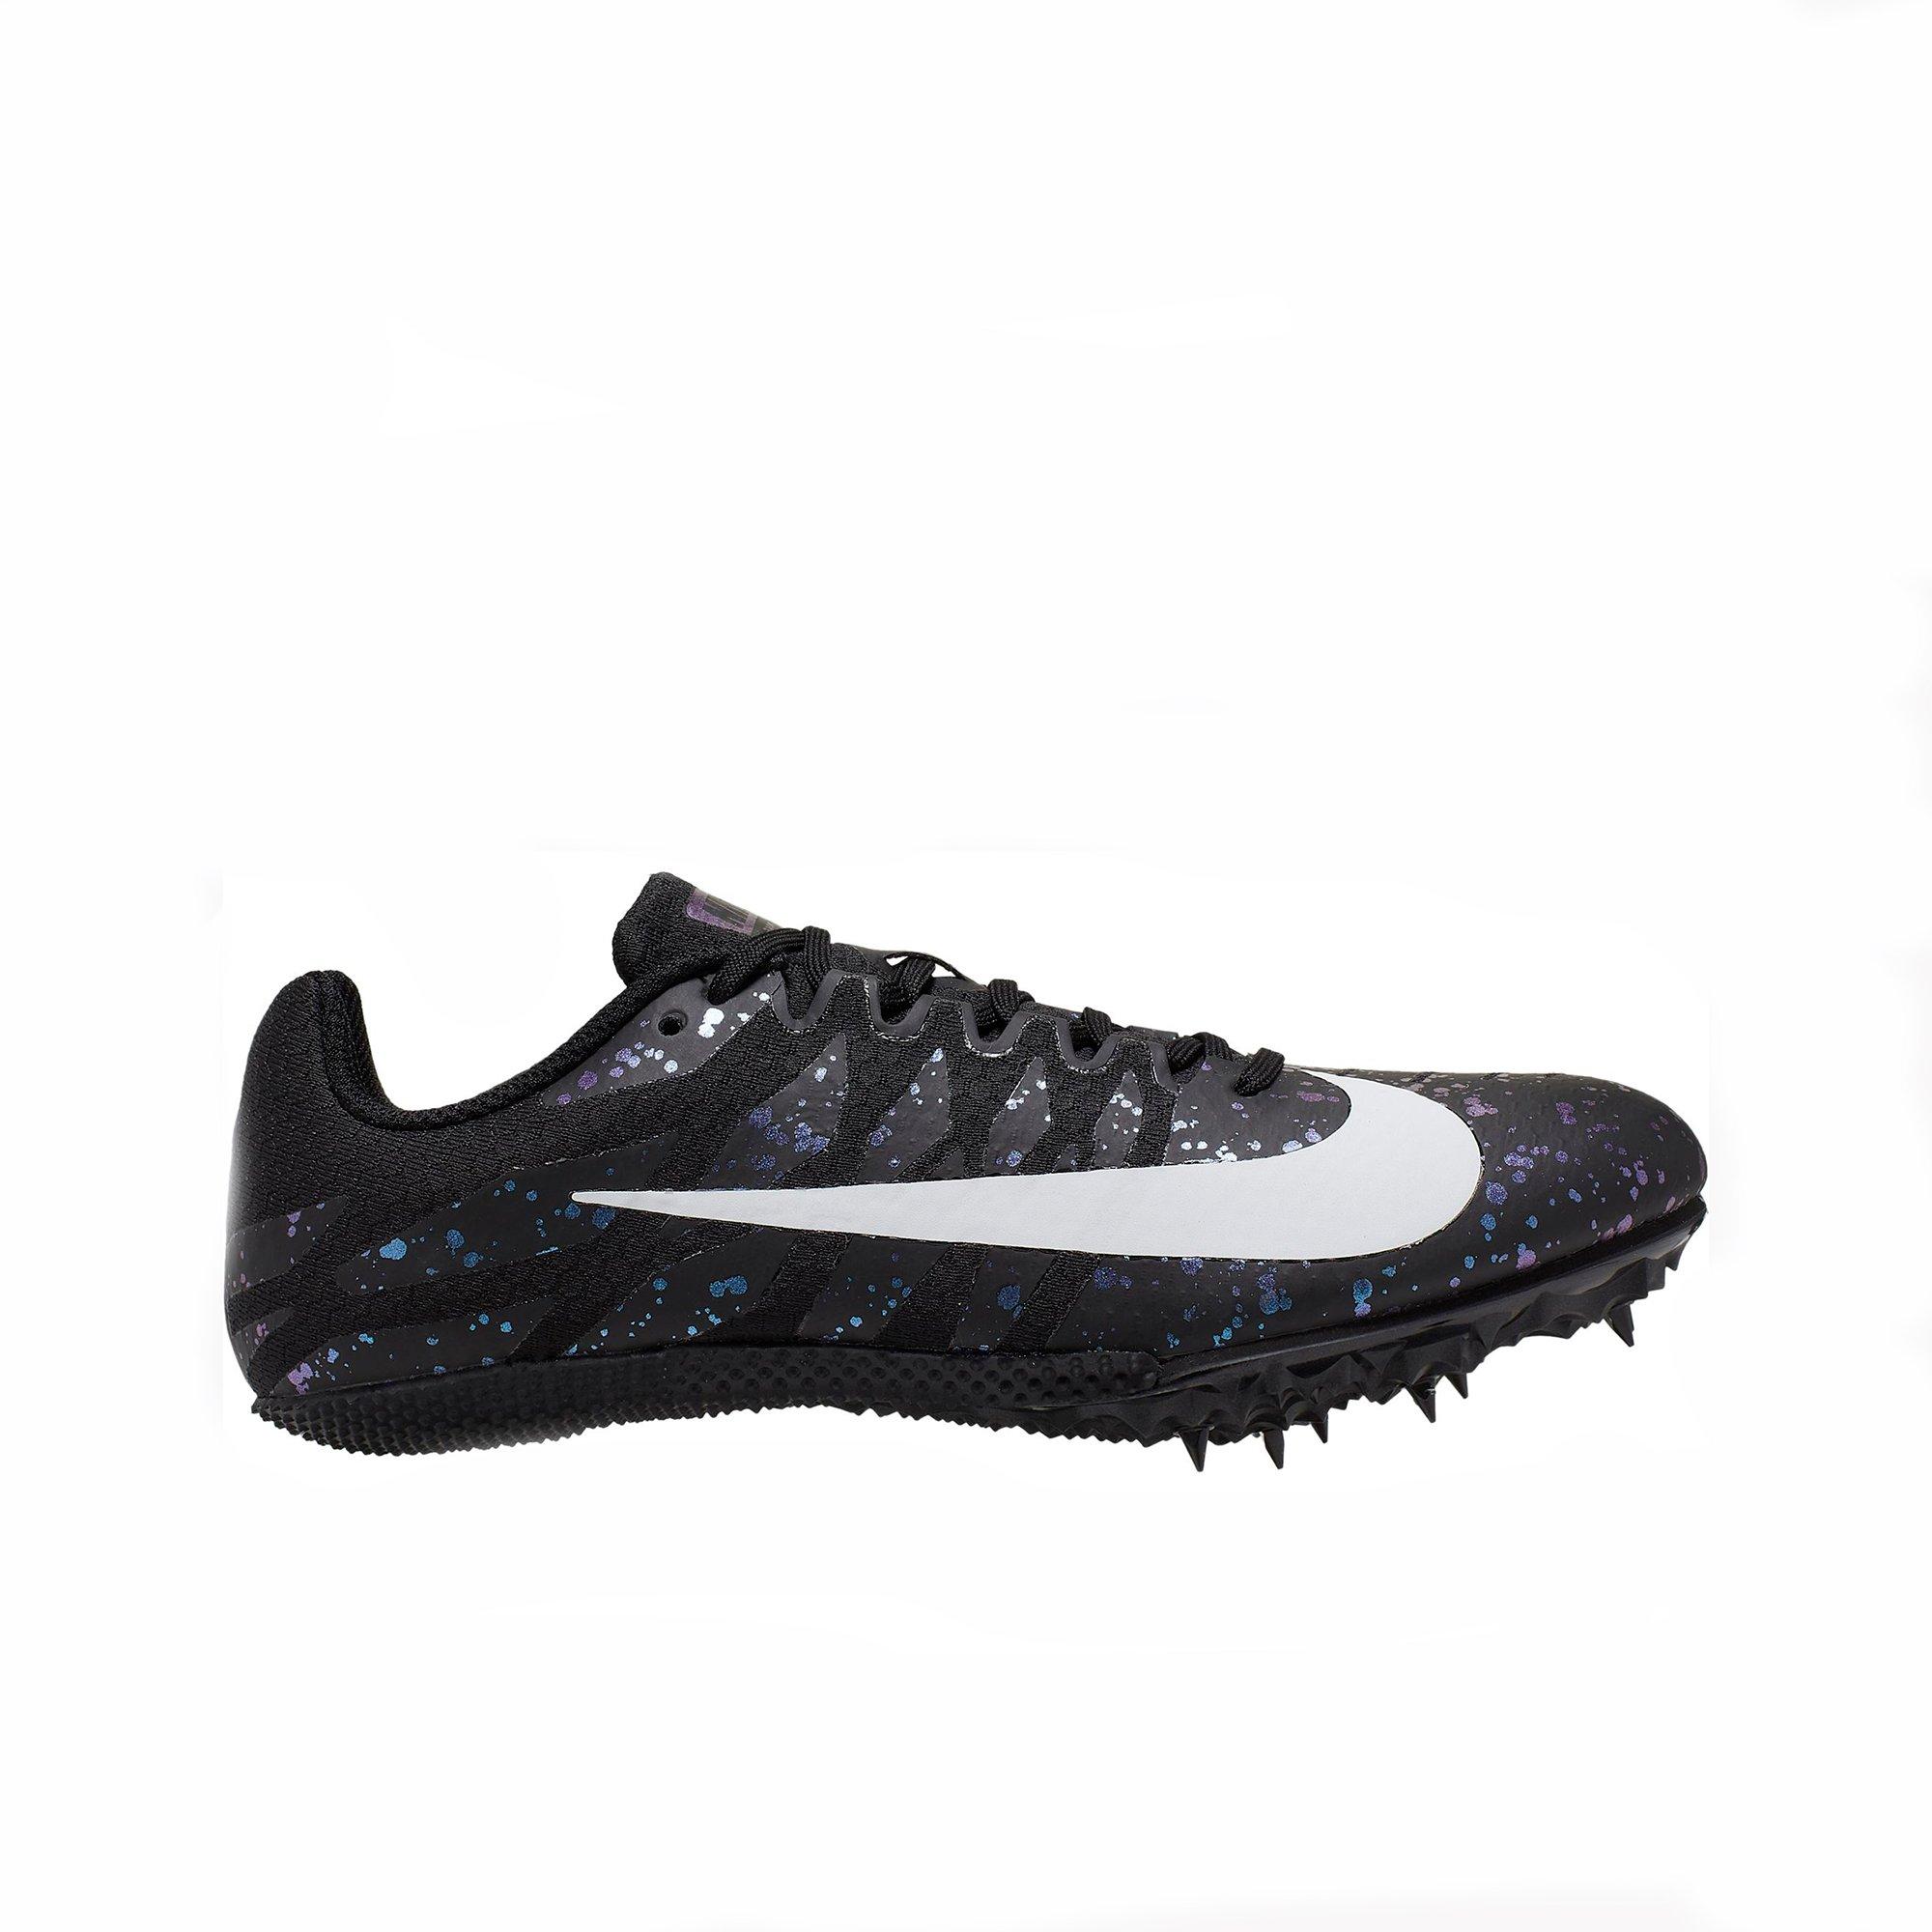 track spikes sale